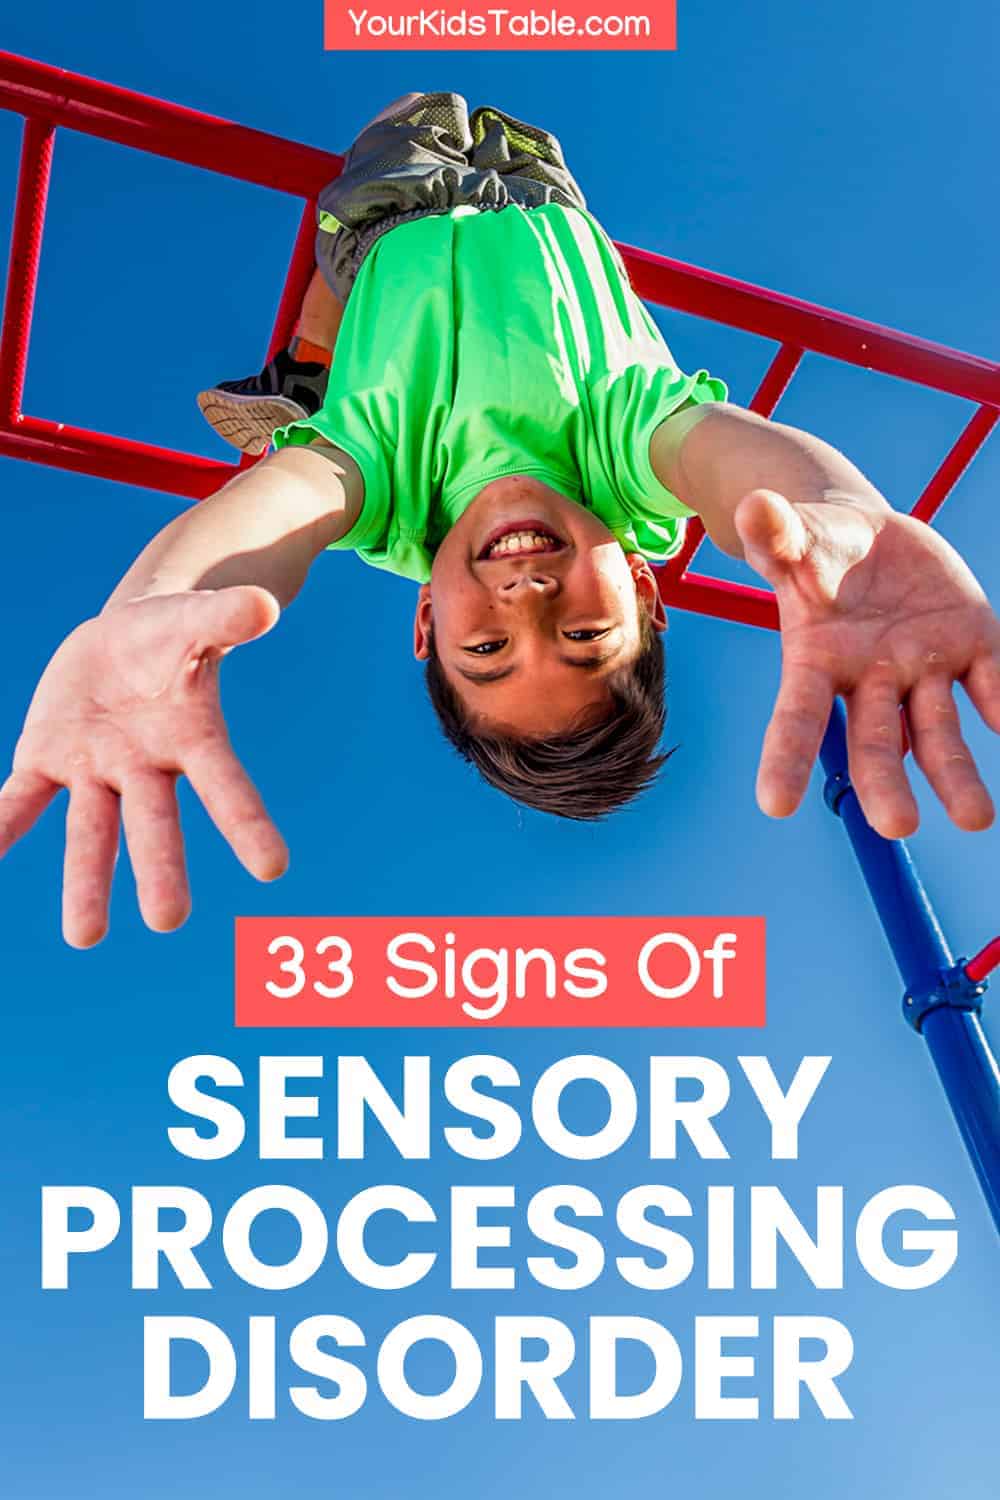 Learn the important symptoms and signs of sensory processing disorder in toddlers and children from an occupational therapist, and how to get a diagnosis and treatment options for SPD.